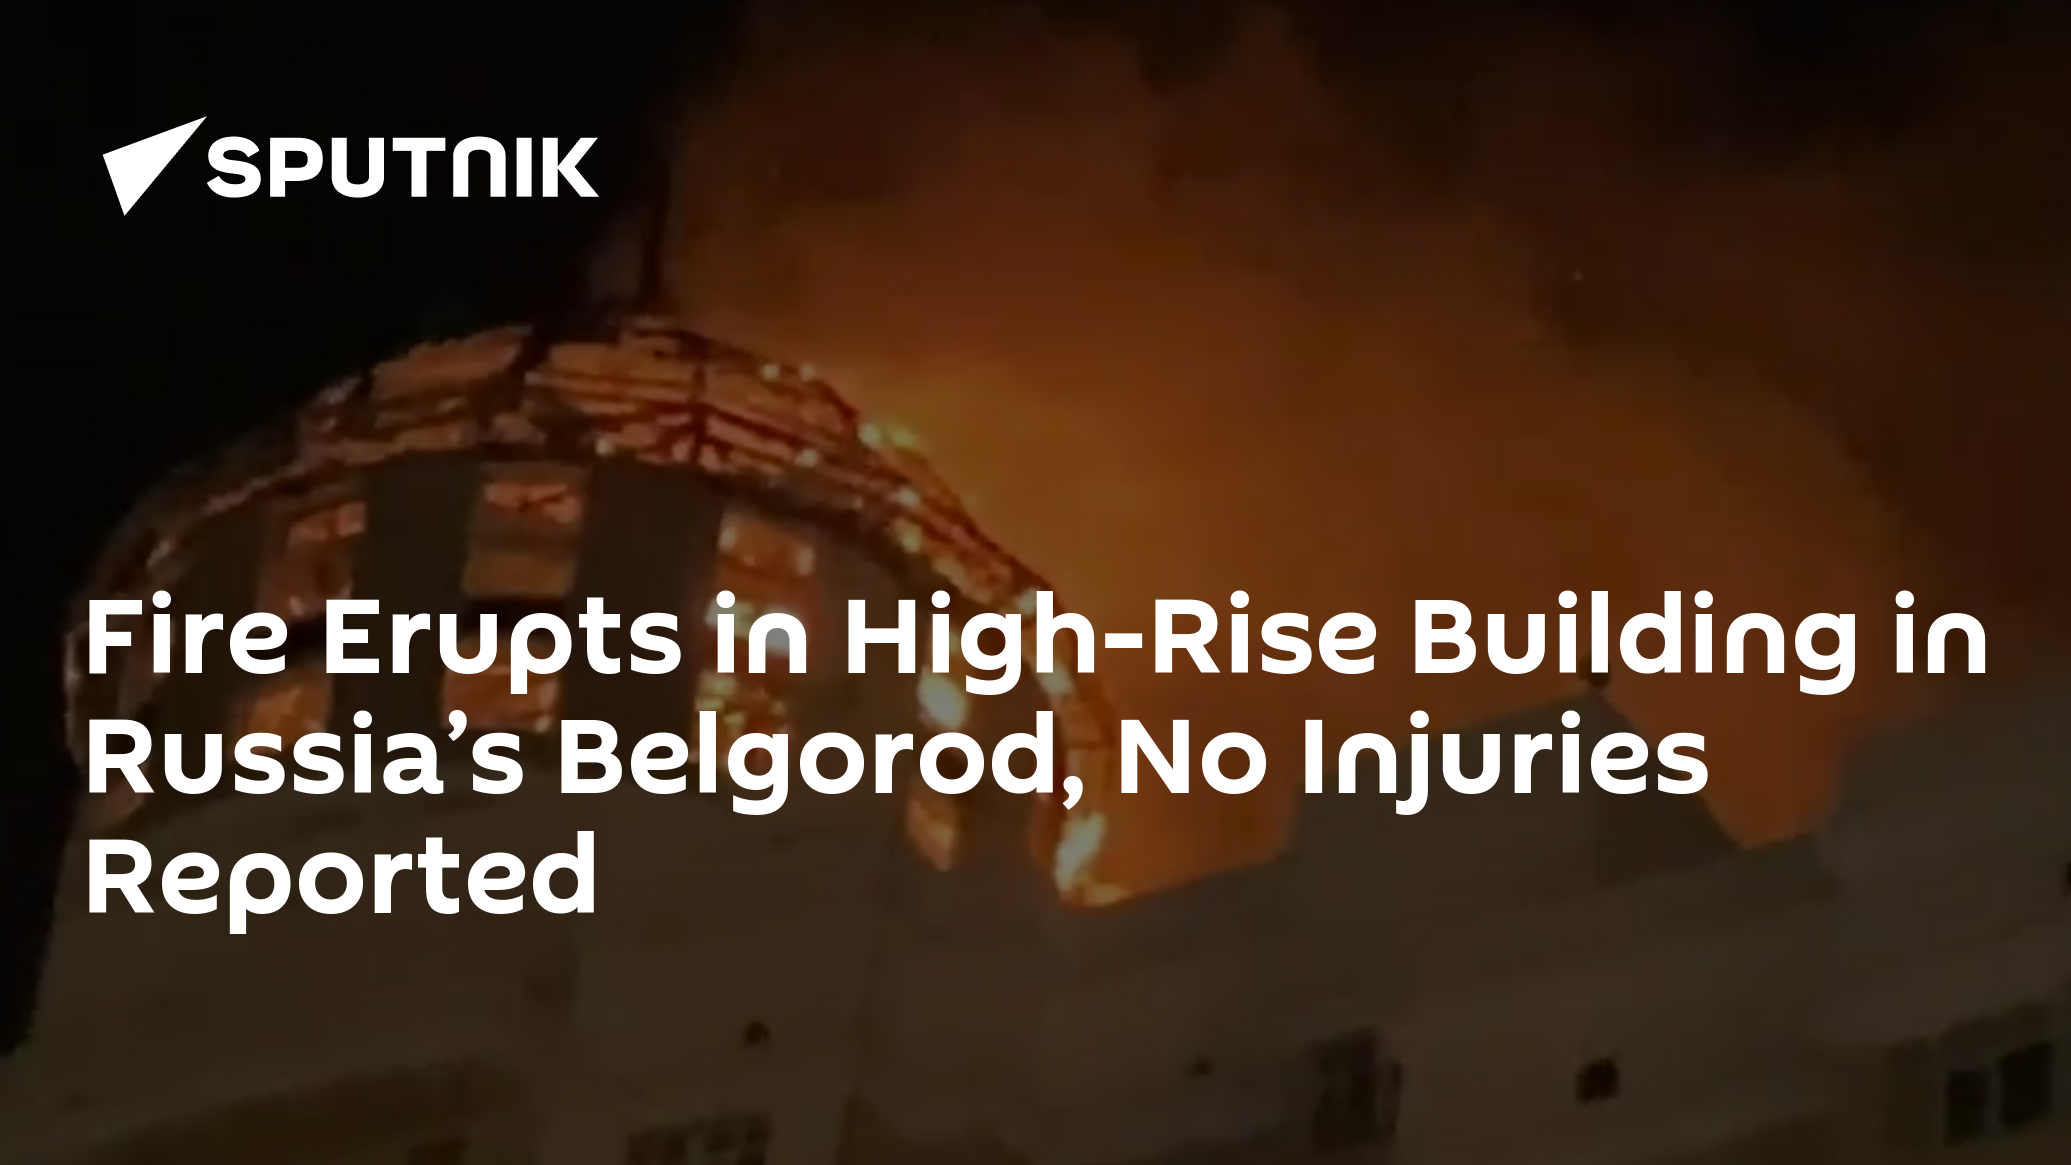 Fire Erupts in High-Rise Building in Russia’s Belgorod, No Injuries Reported